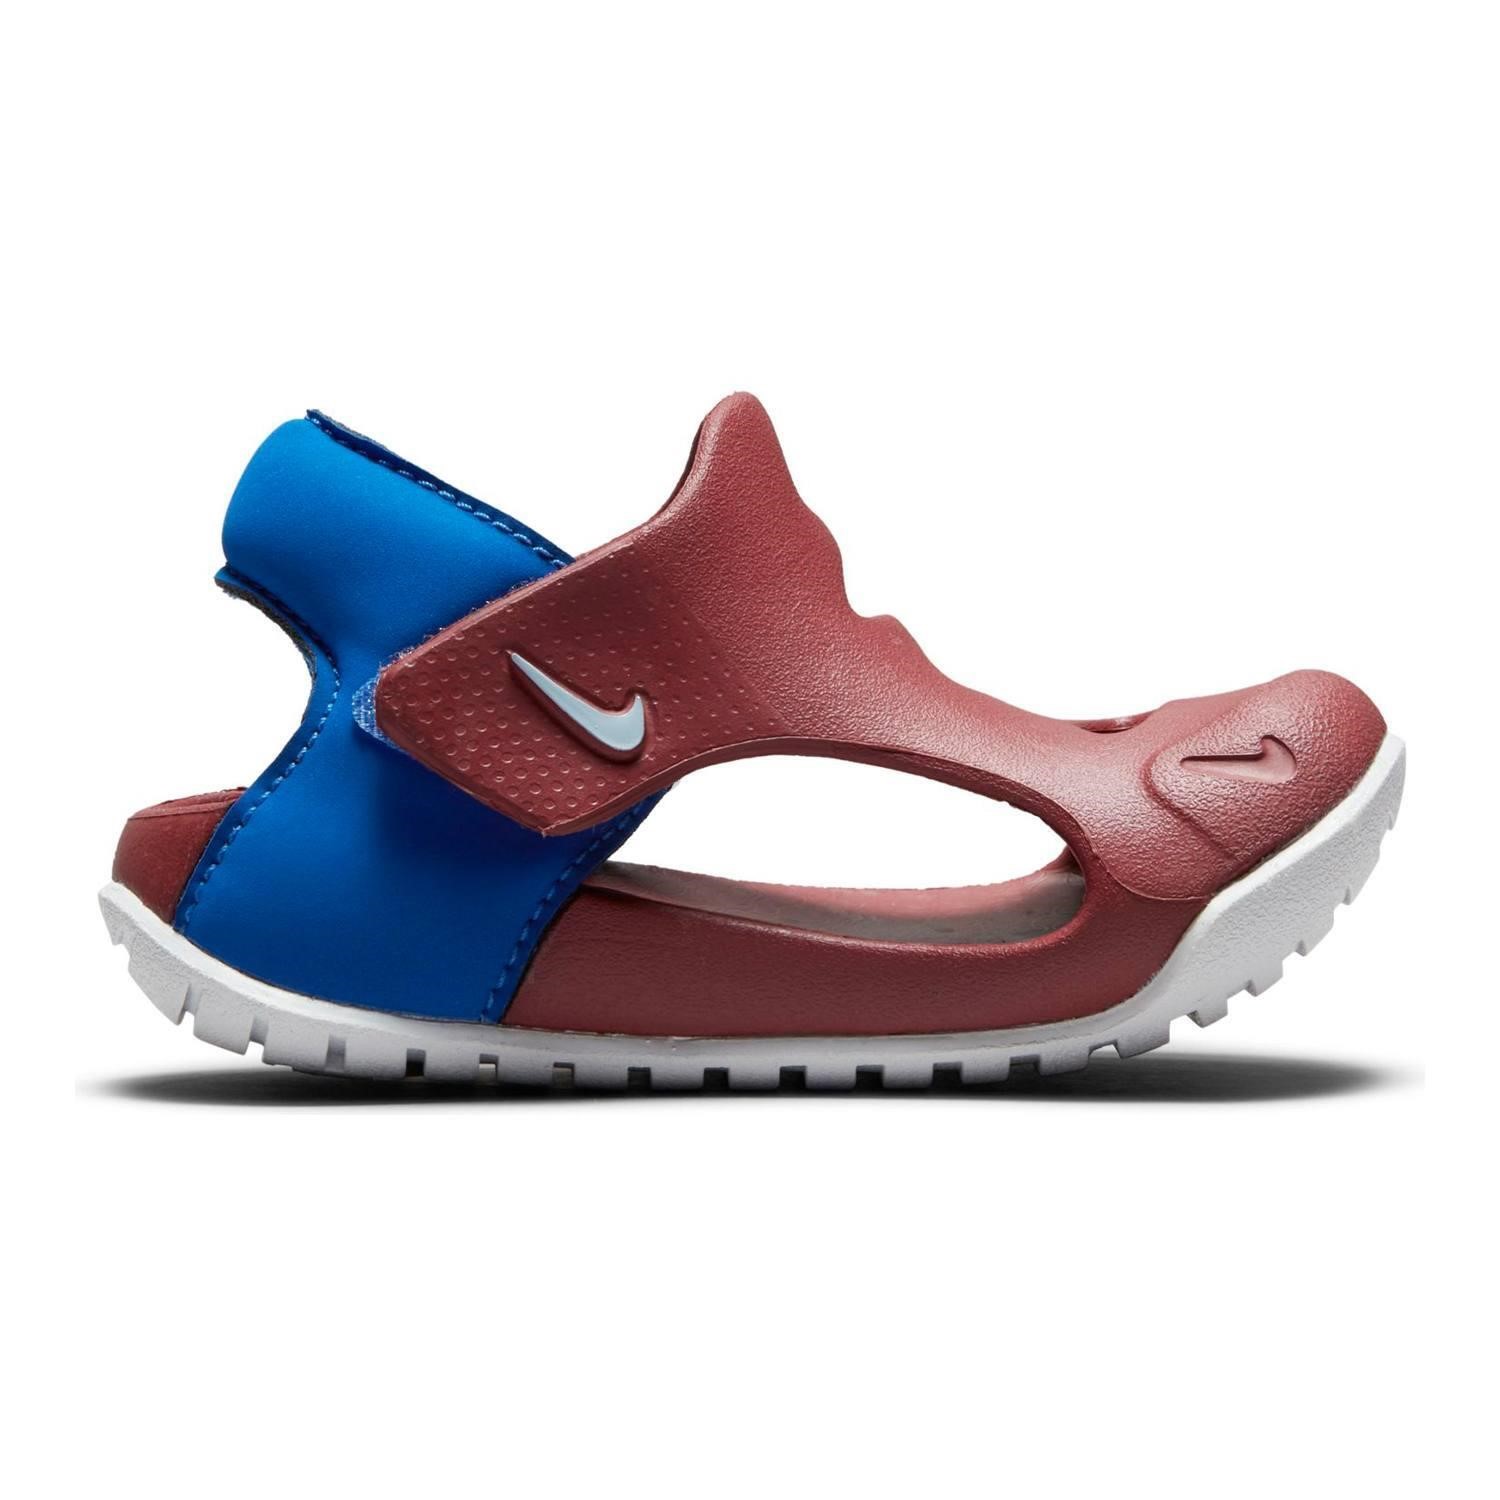 $16  Nike Sunray Protect 3 Baby/Toddler Sandals